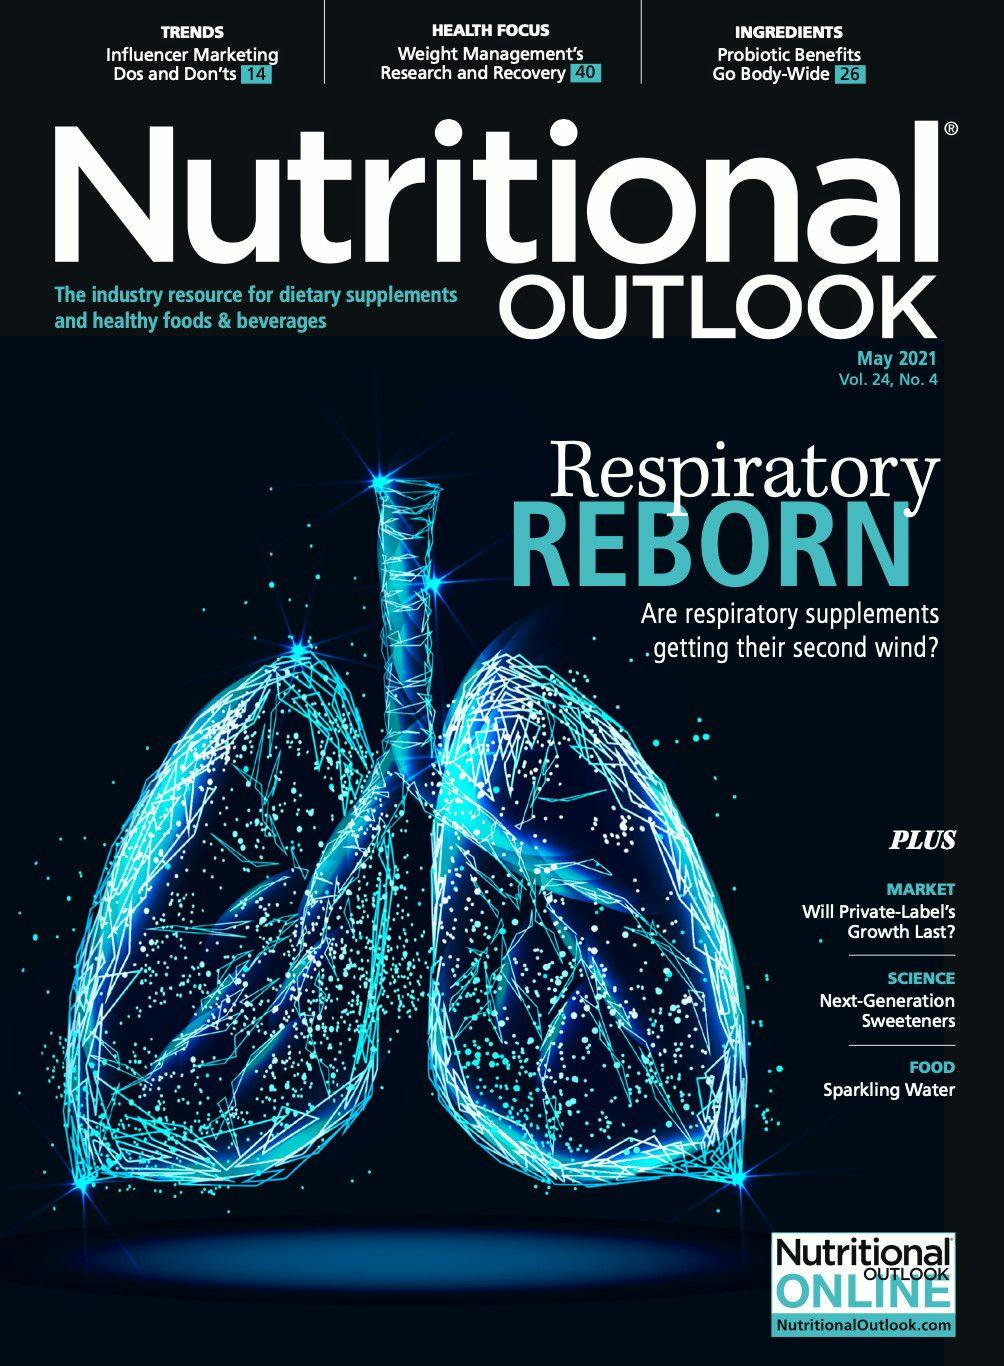 Nutritional Outlook Vol. 24 No. 4